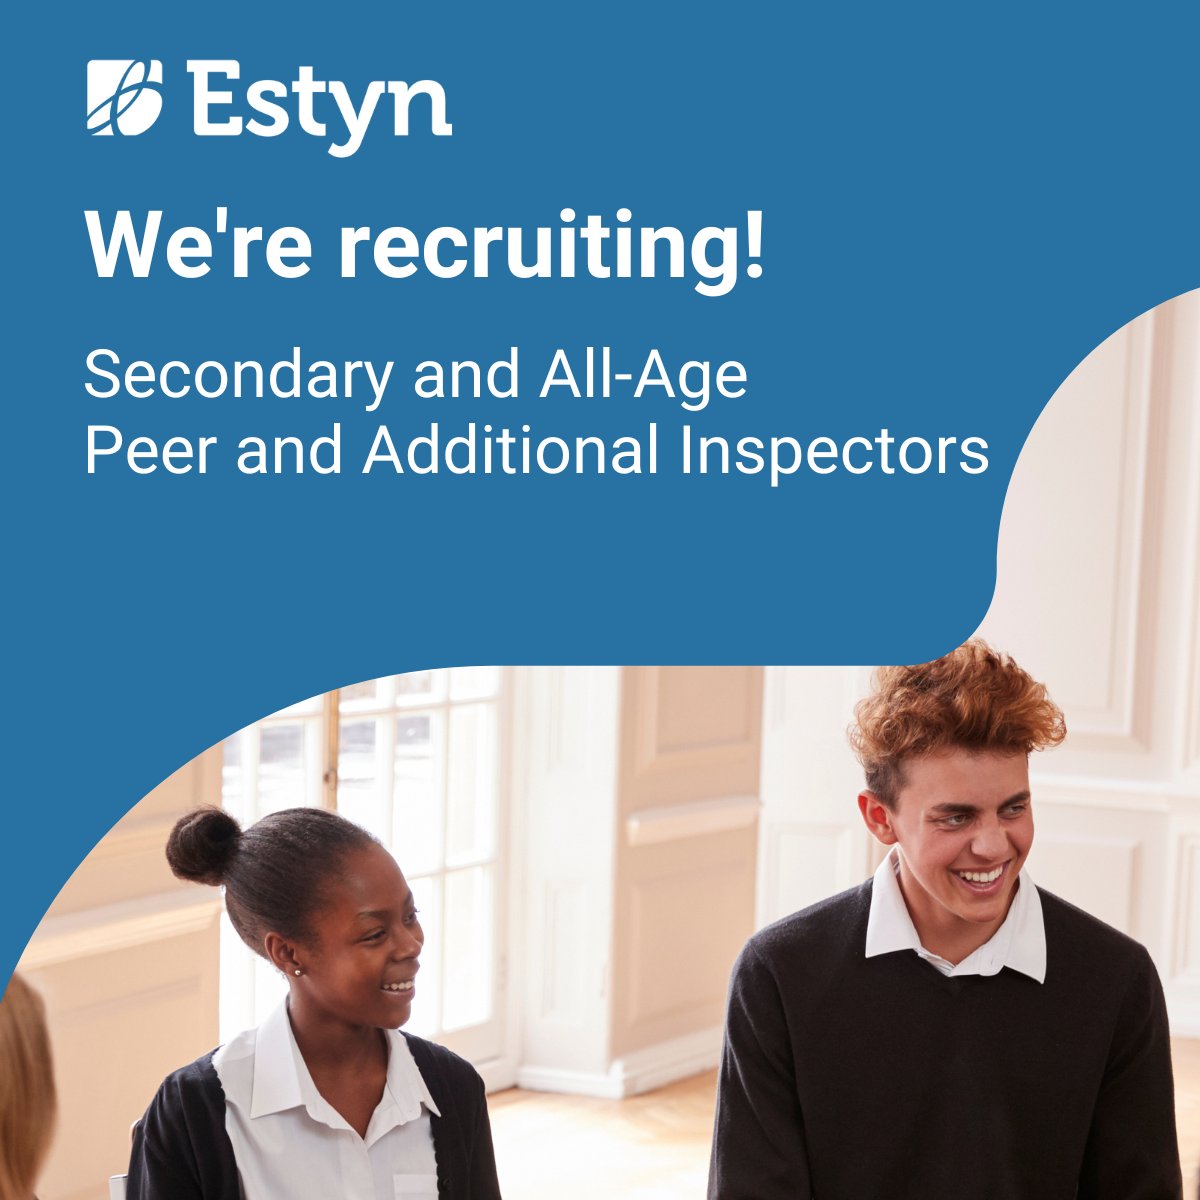 Want to join our inspection teams and help drive effective practice in secondary or all-age education? Why not apply to train as a Peer or Additional Inspector – open now: estyn.gov.wales/working-us/cur…